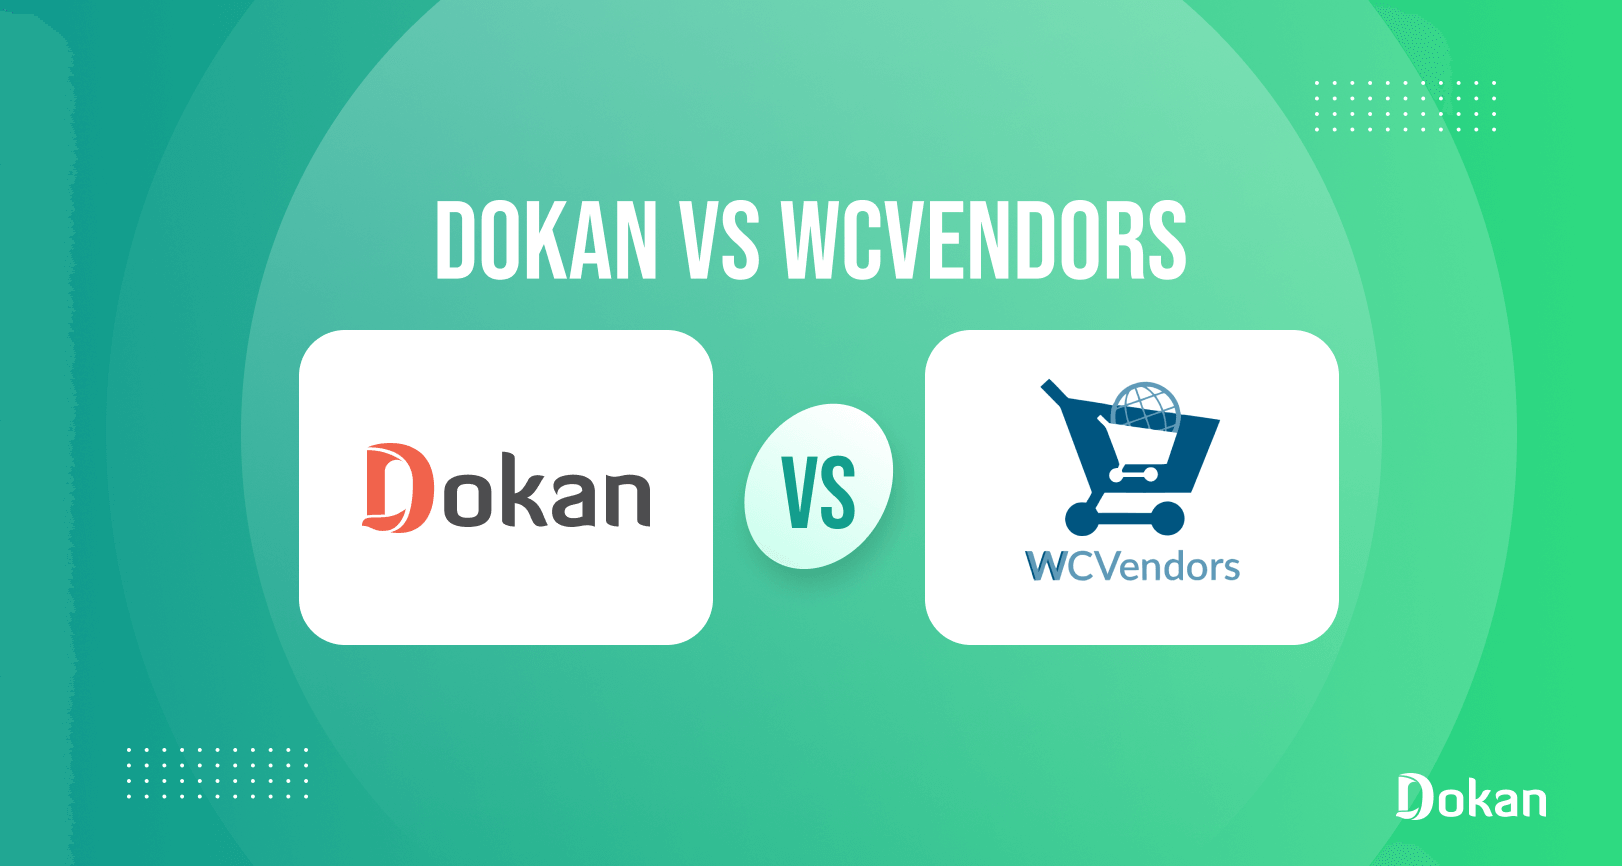 Dokan vs WC Vendors: Here’s What You Should Check Before Making a Decision